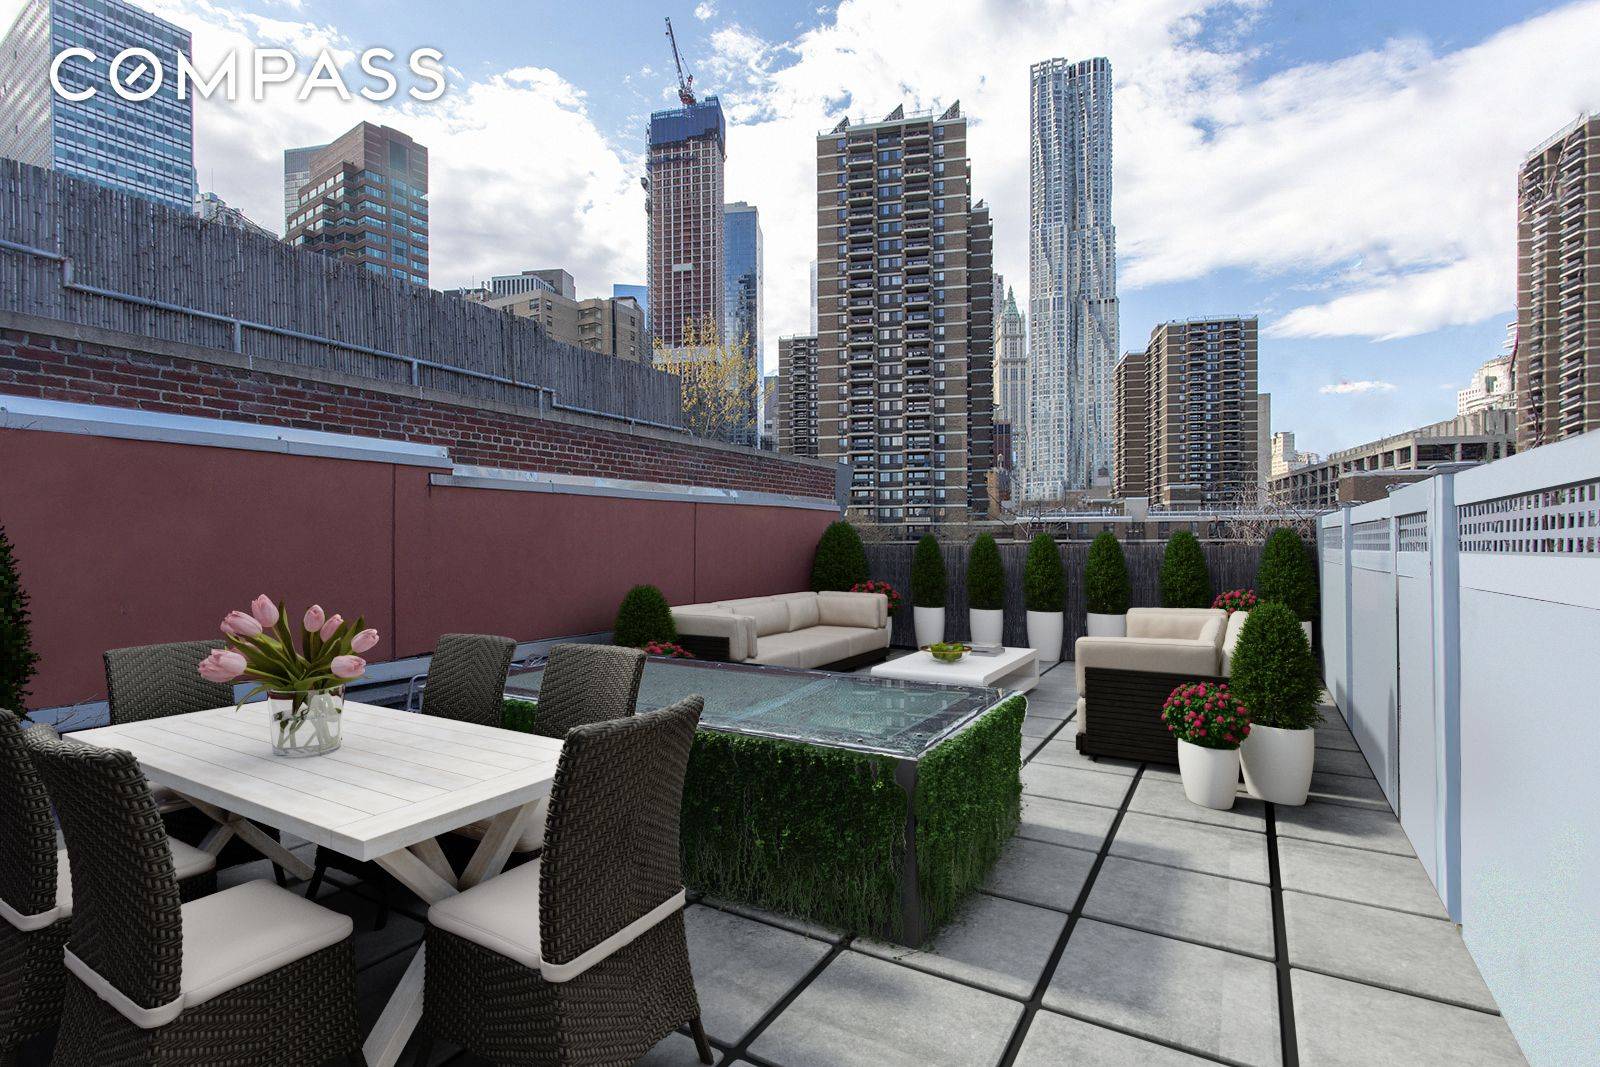 Expansive Triplex Penthouse with 1, 500 sqft of Private Outdoor Space perfect for entertaining.